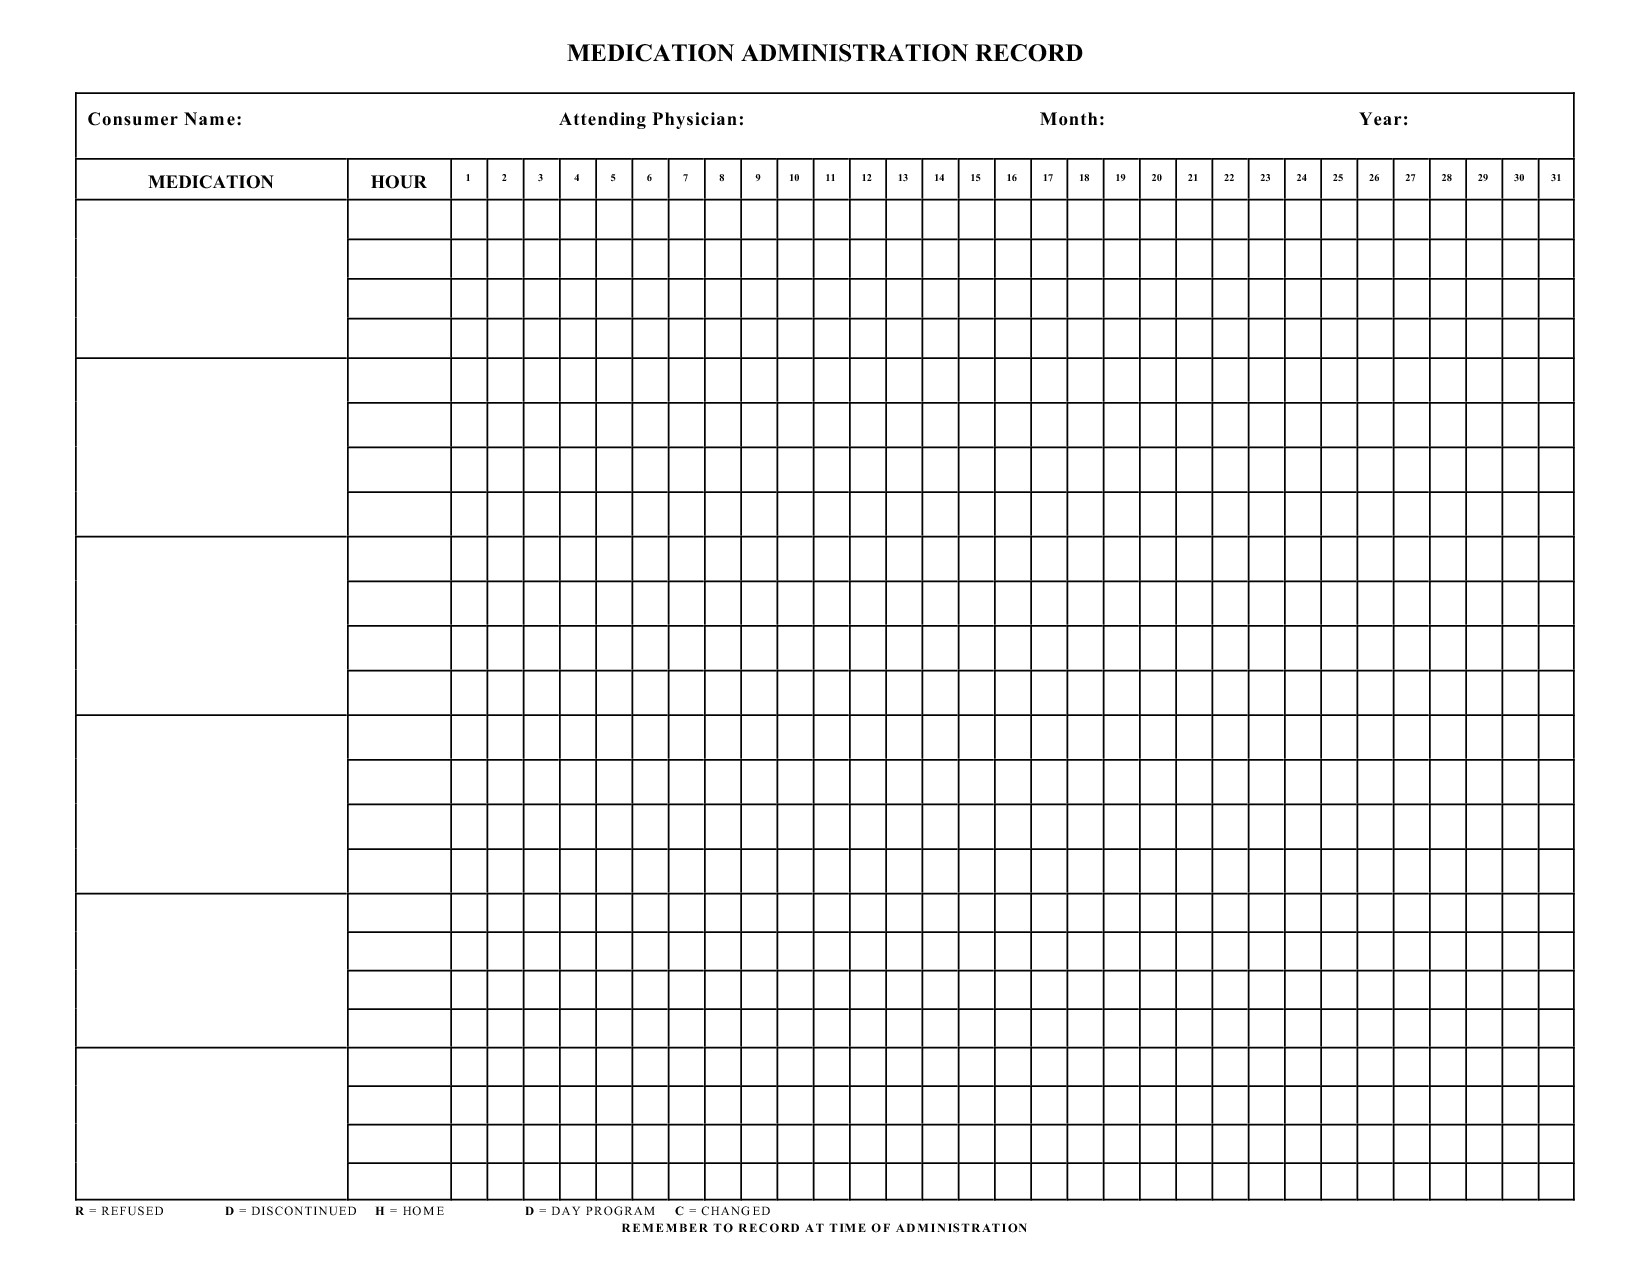 Does Blank Card Work with Pills Blank Medication Administration Record Template with Images